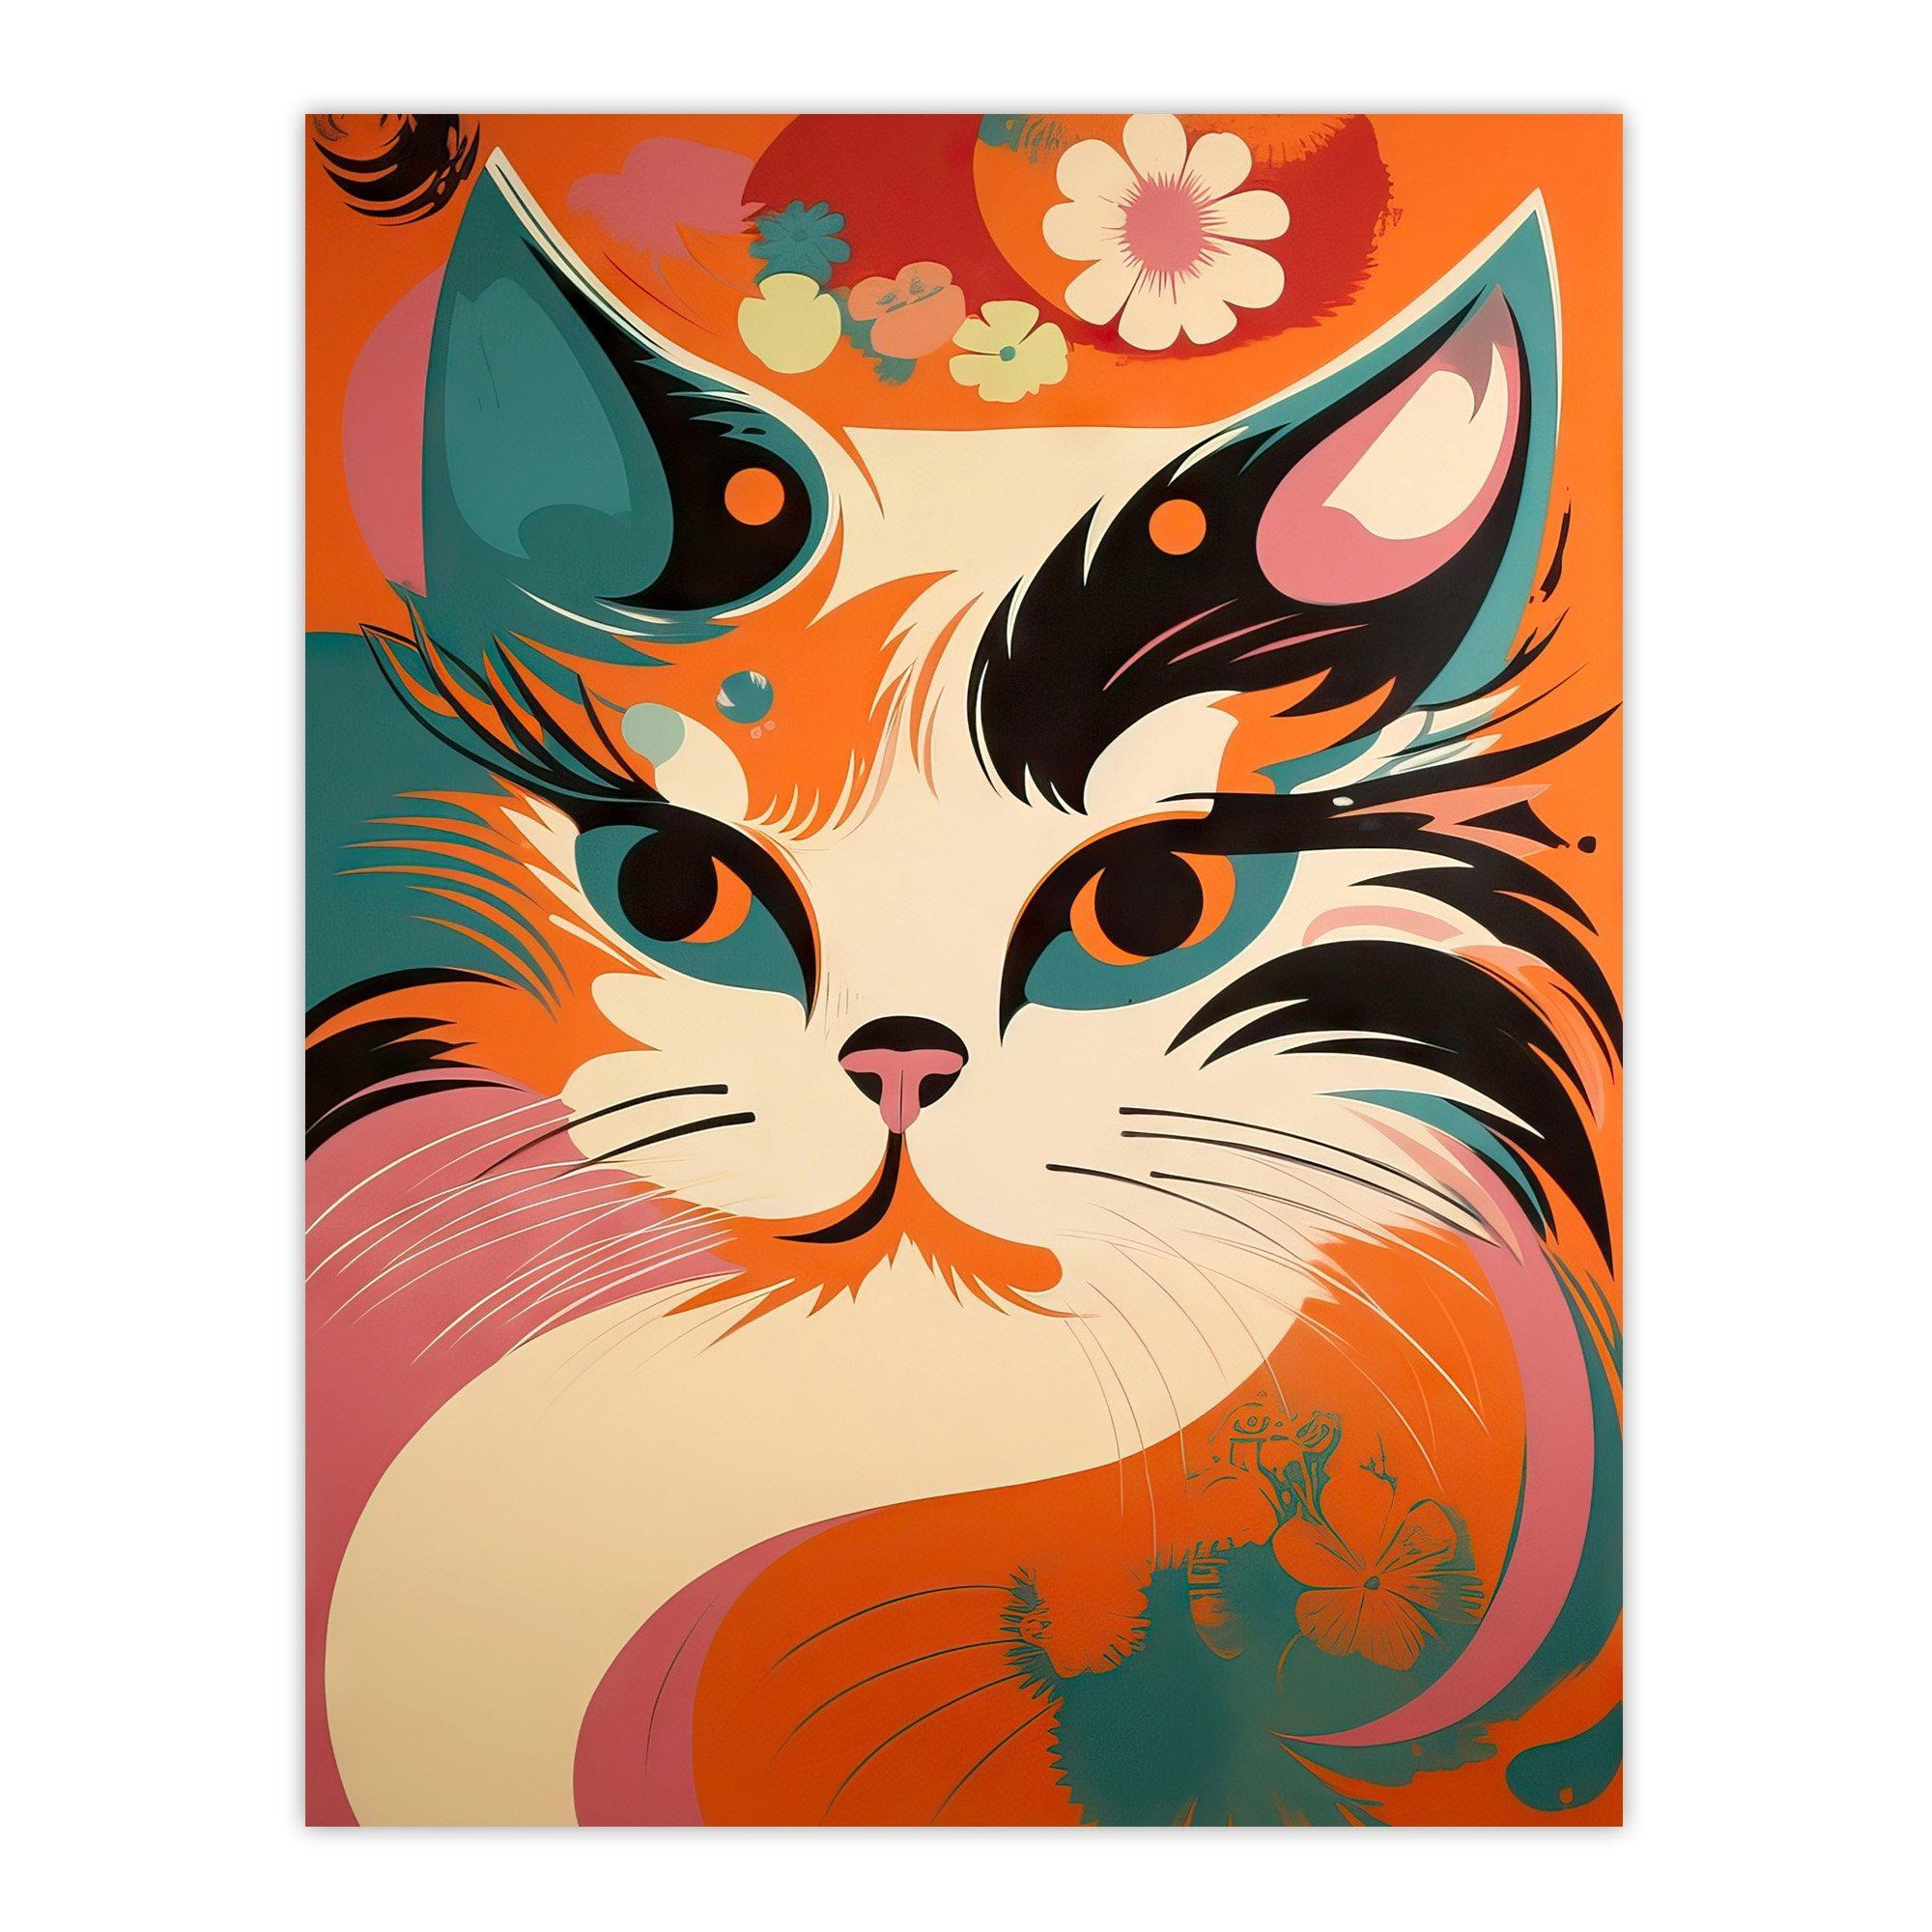 Wall Art Print Cat Graphic 1960s Painting Orange Blue Teal Pink Floral Retro Boho Animal Portrait Poster - image 1